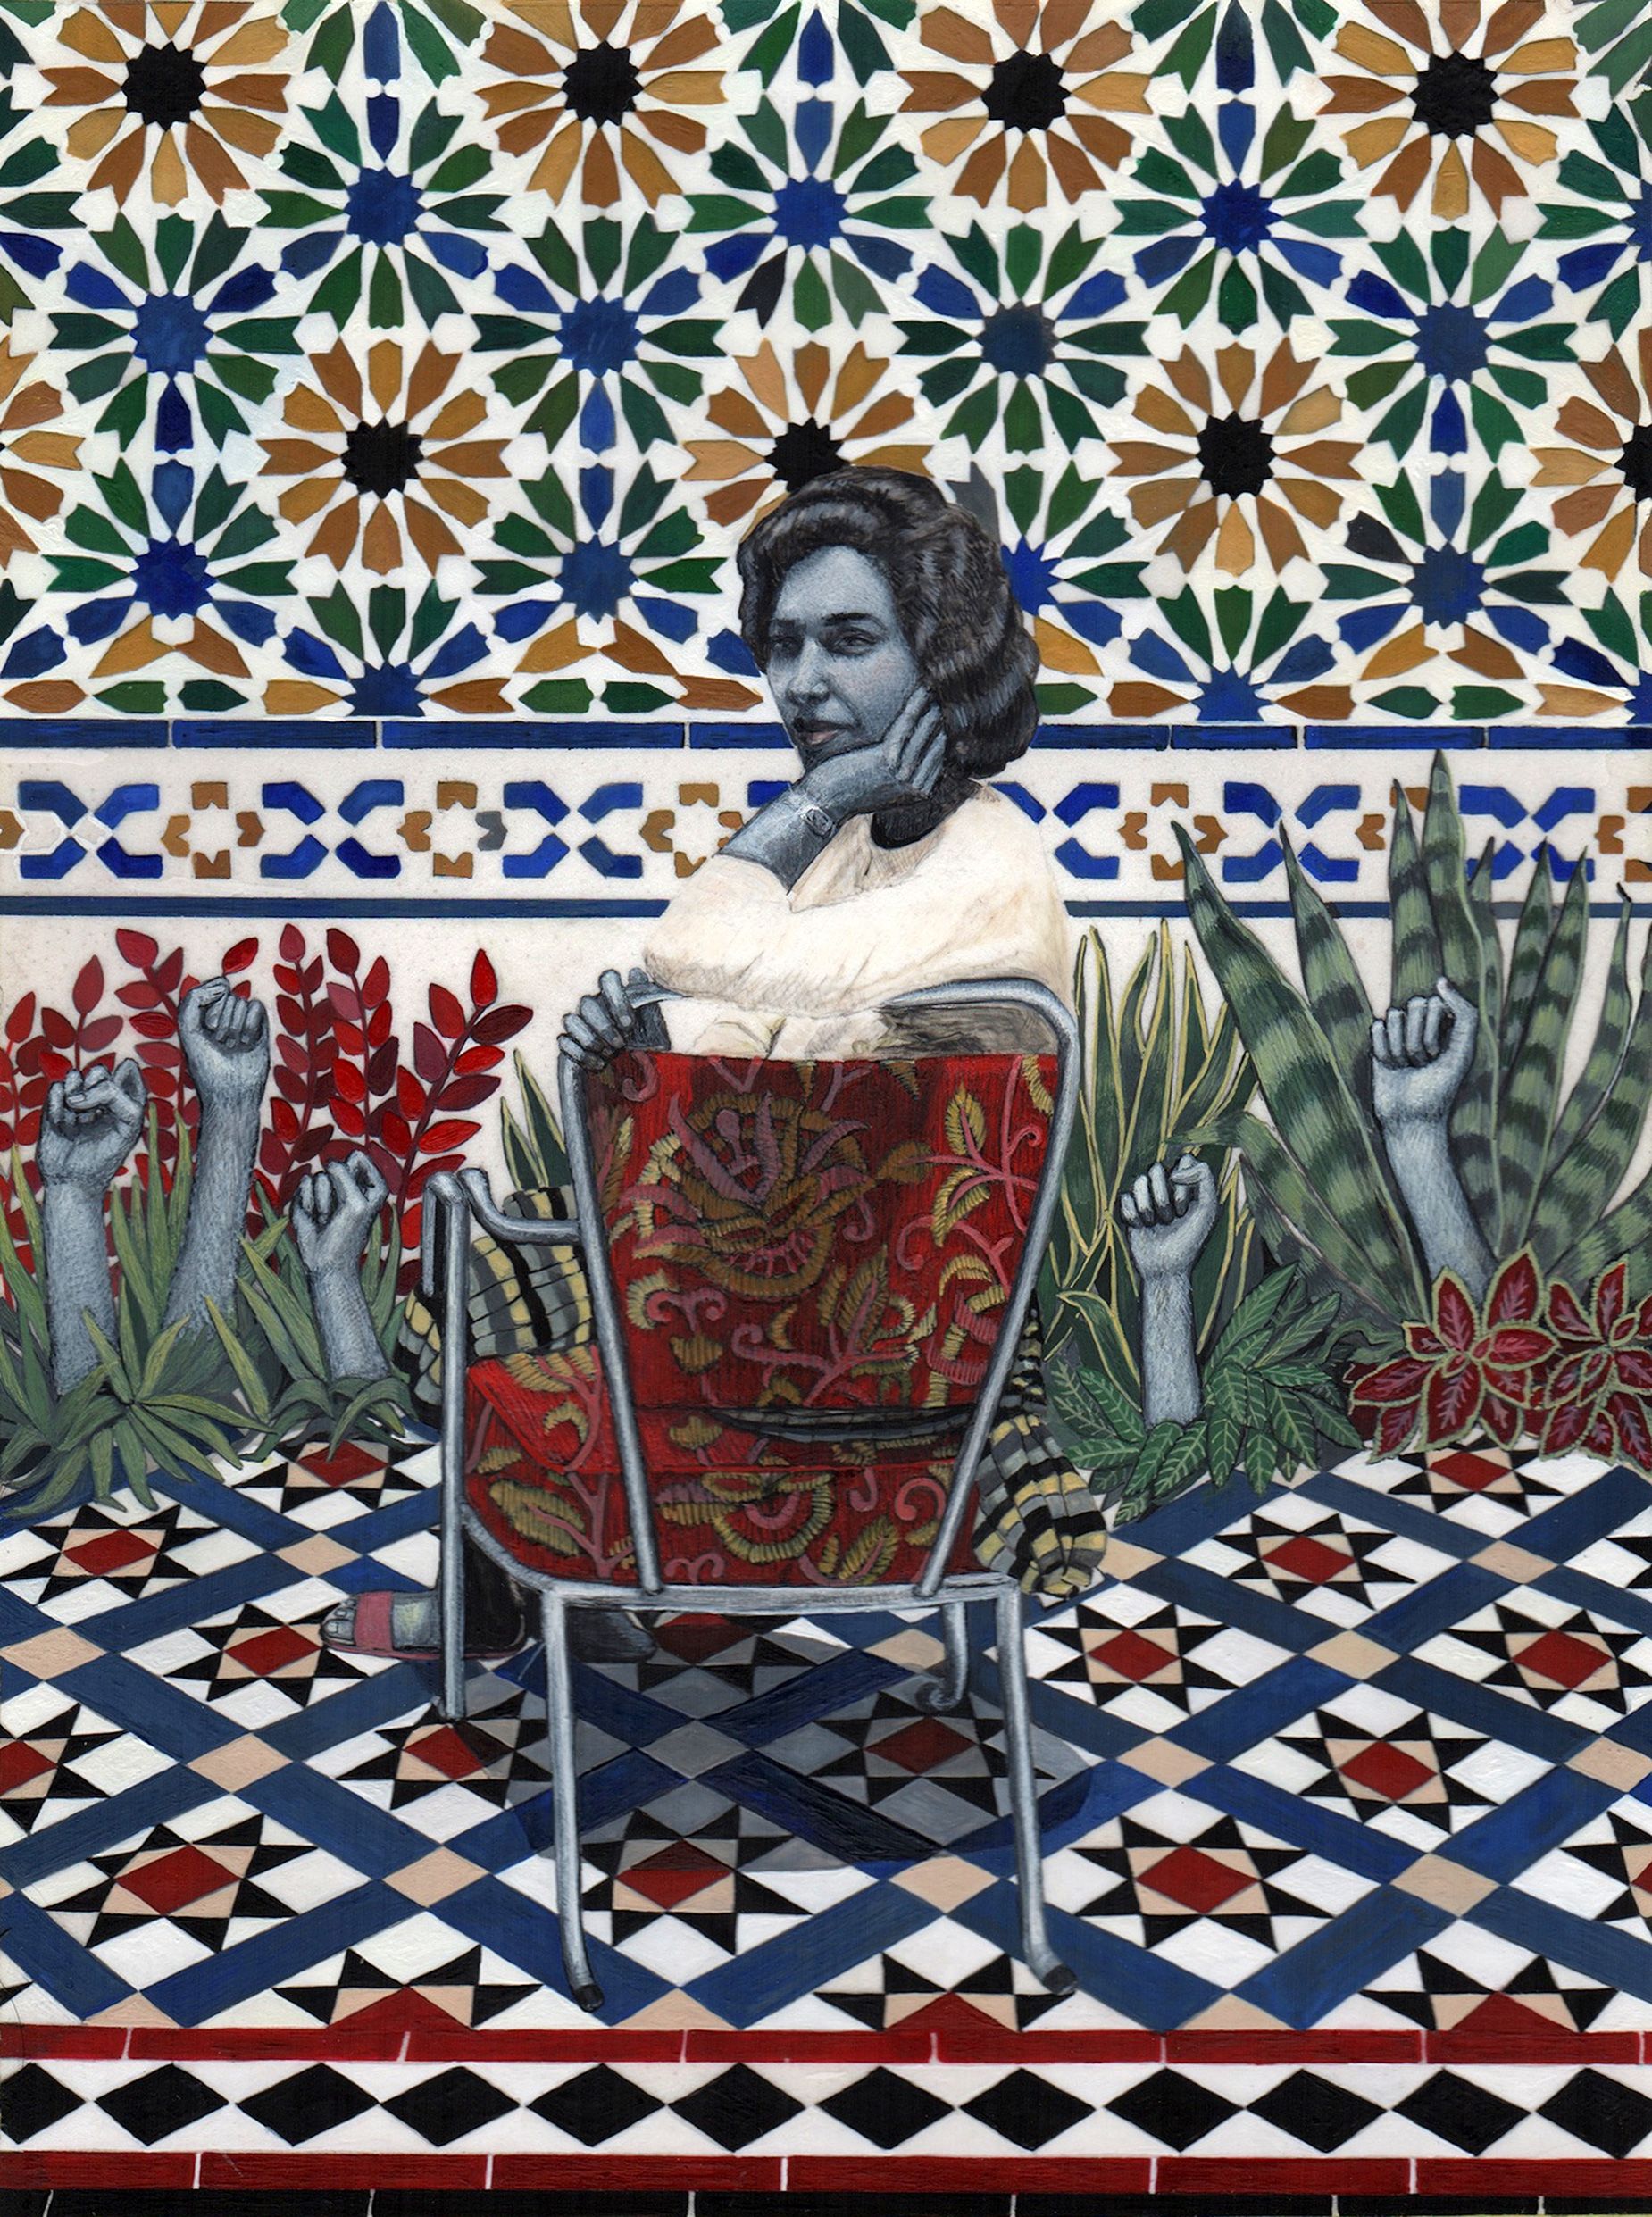 In “Conquest of the Garden,” Sokhanvari's mother can be seen sitting on a chintzy chair in a walled garden decorated in bold Islamic tiles. Fists rise up from the flowerbeds.